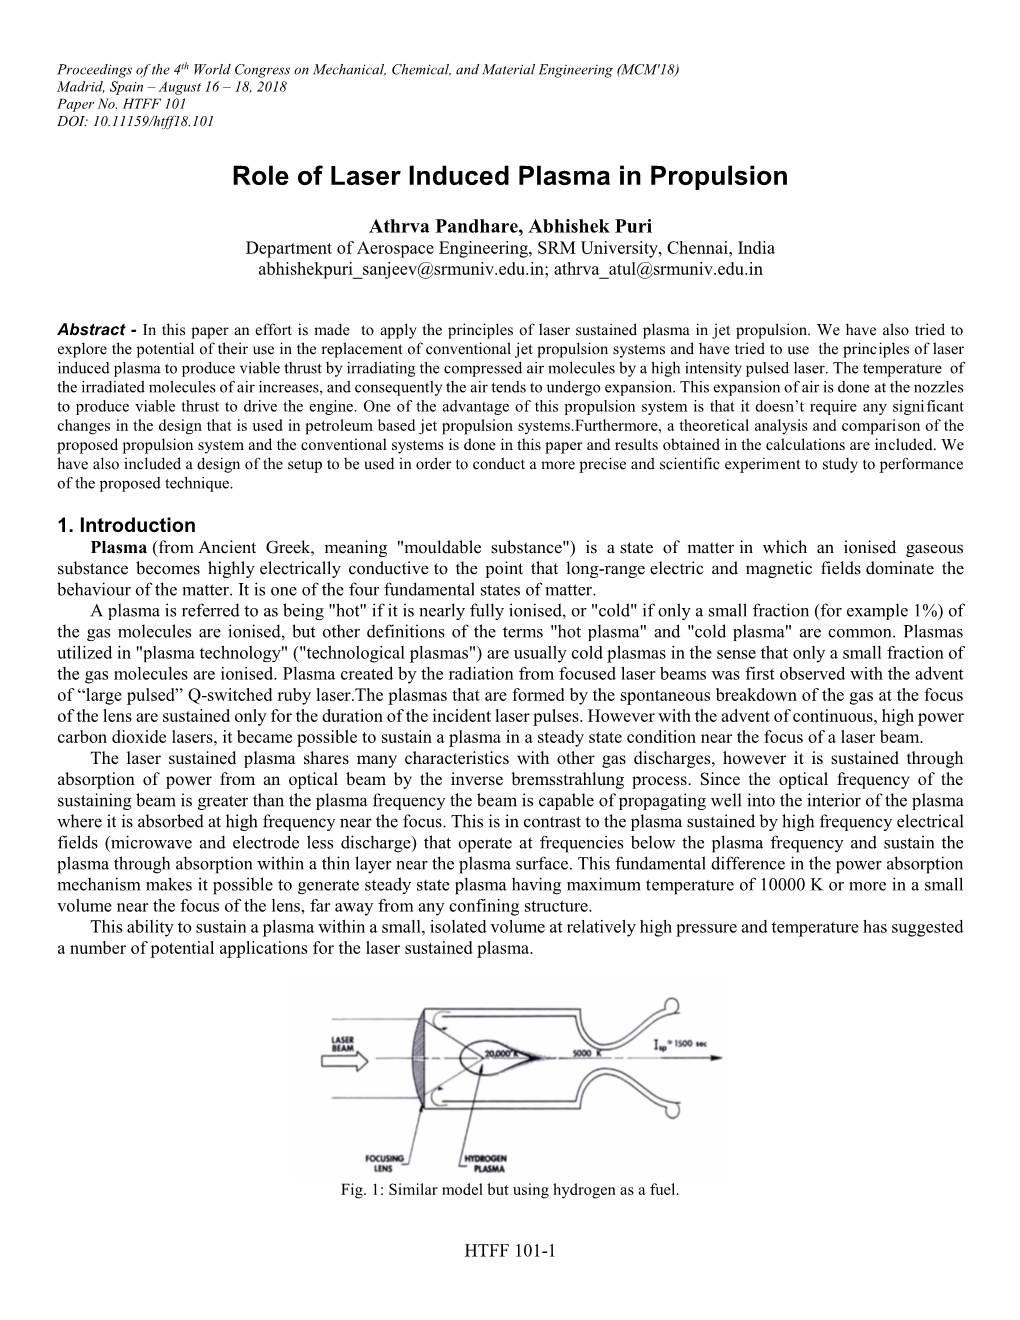 Role of Laser Induced Plasma in Propulsion